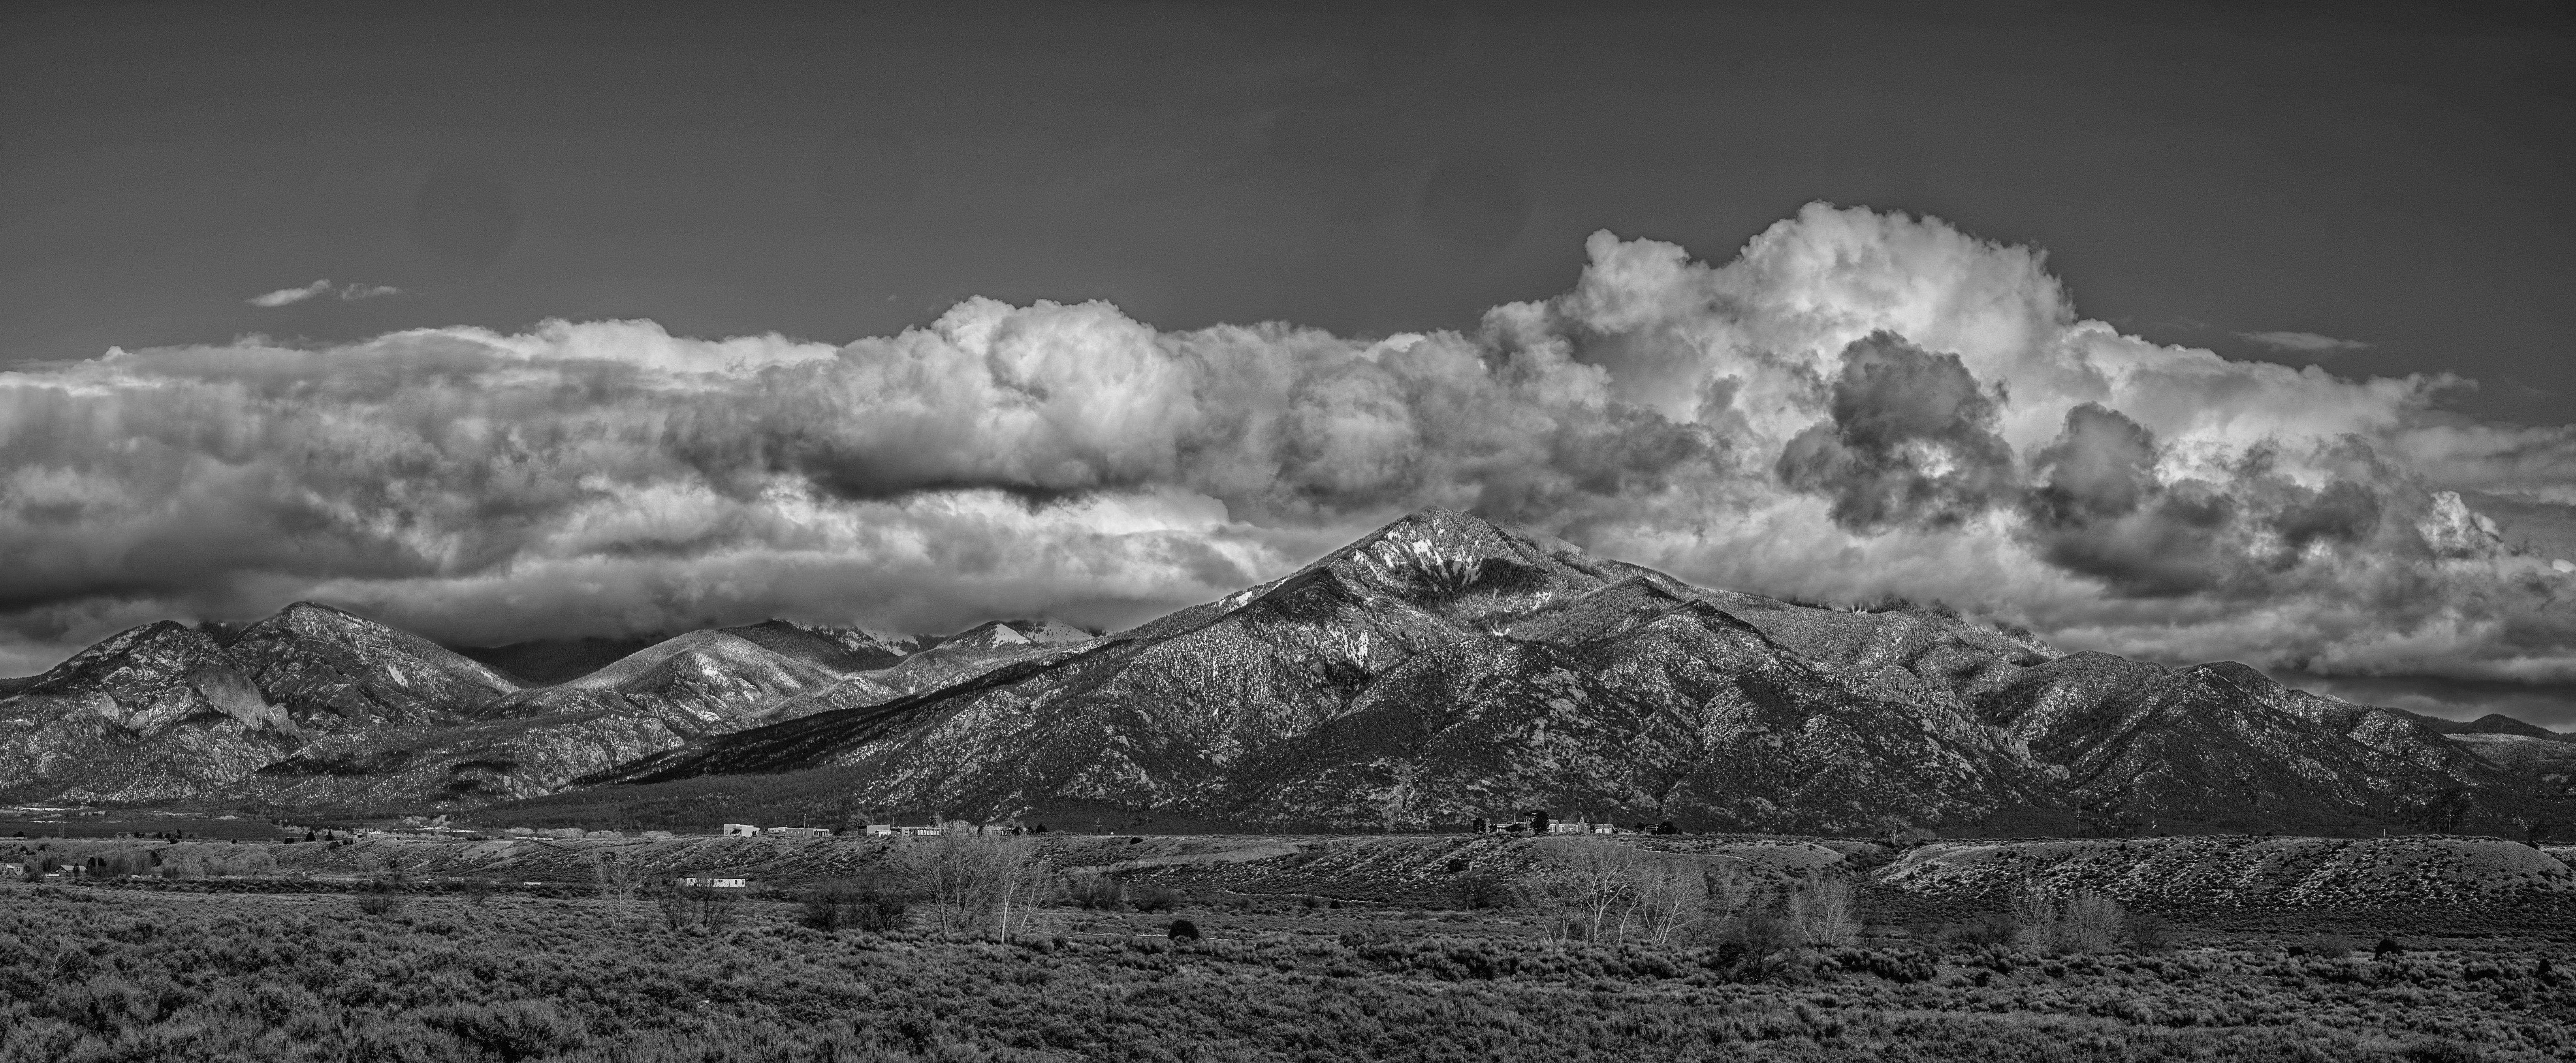 Taos Winter Landscape In Black and White